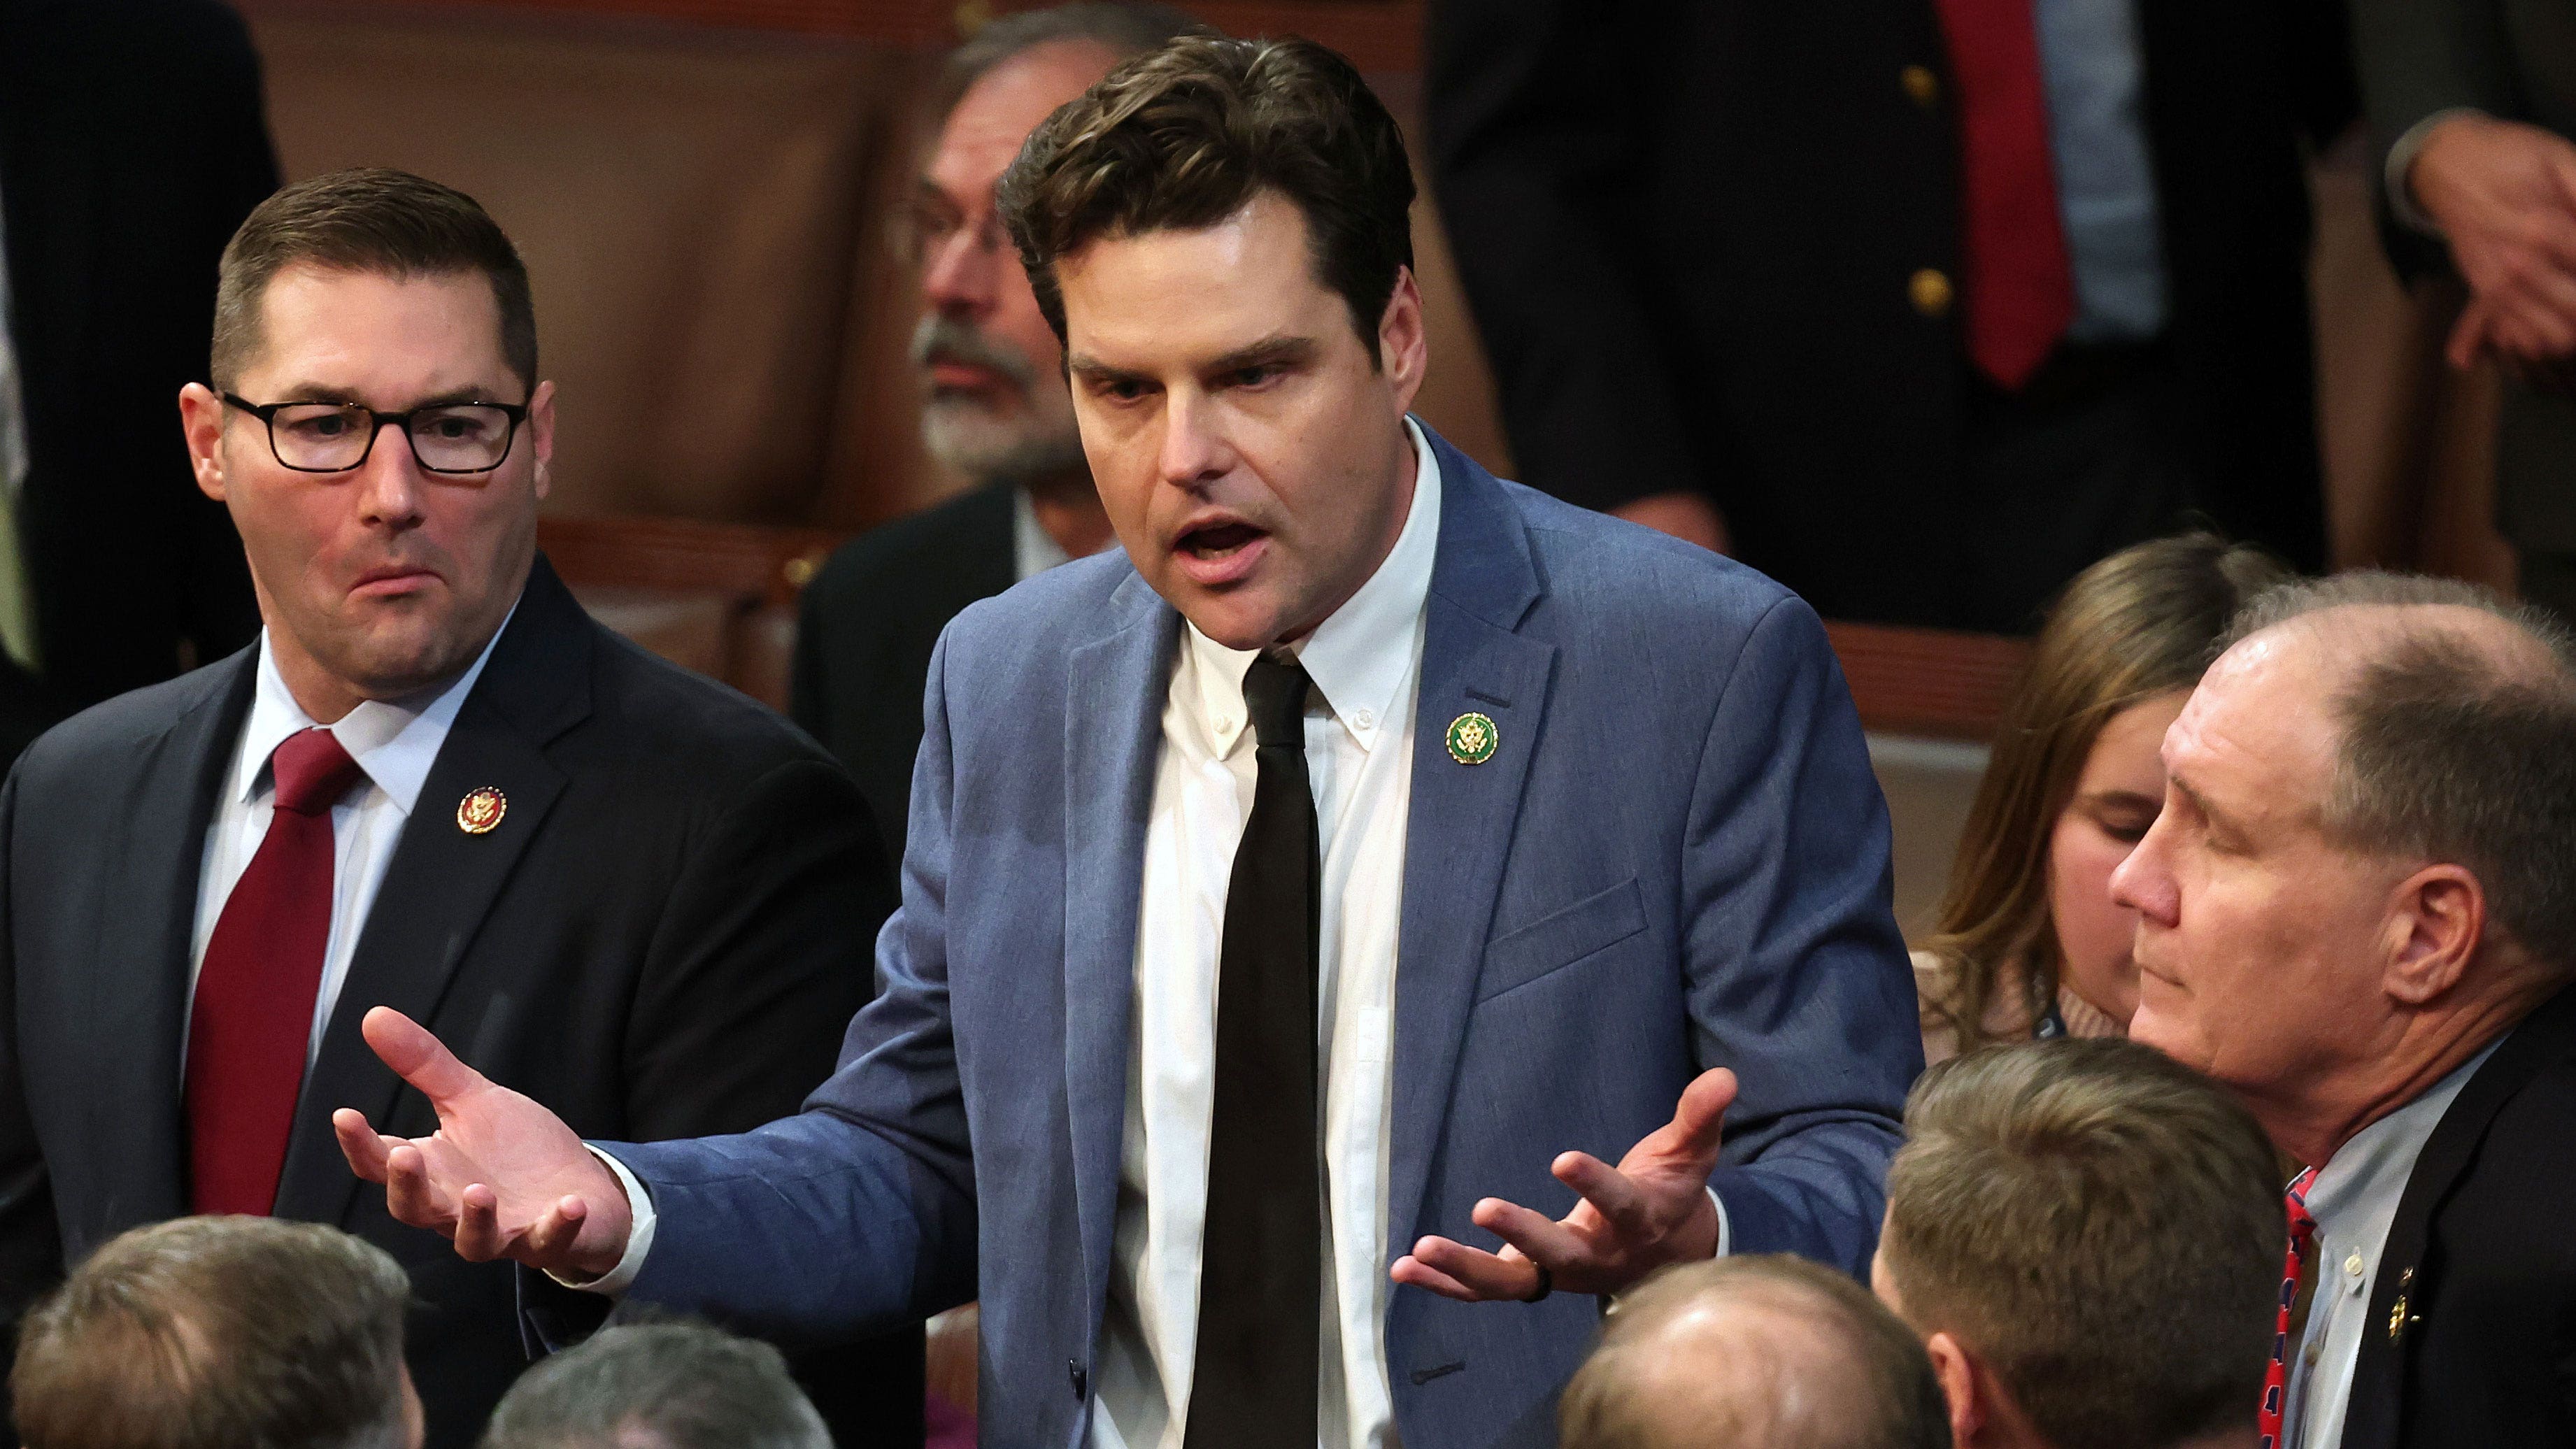 ‘GET IT TOGETHER’: The wildest moments from the House floor during days-long speaker battle